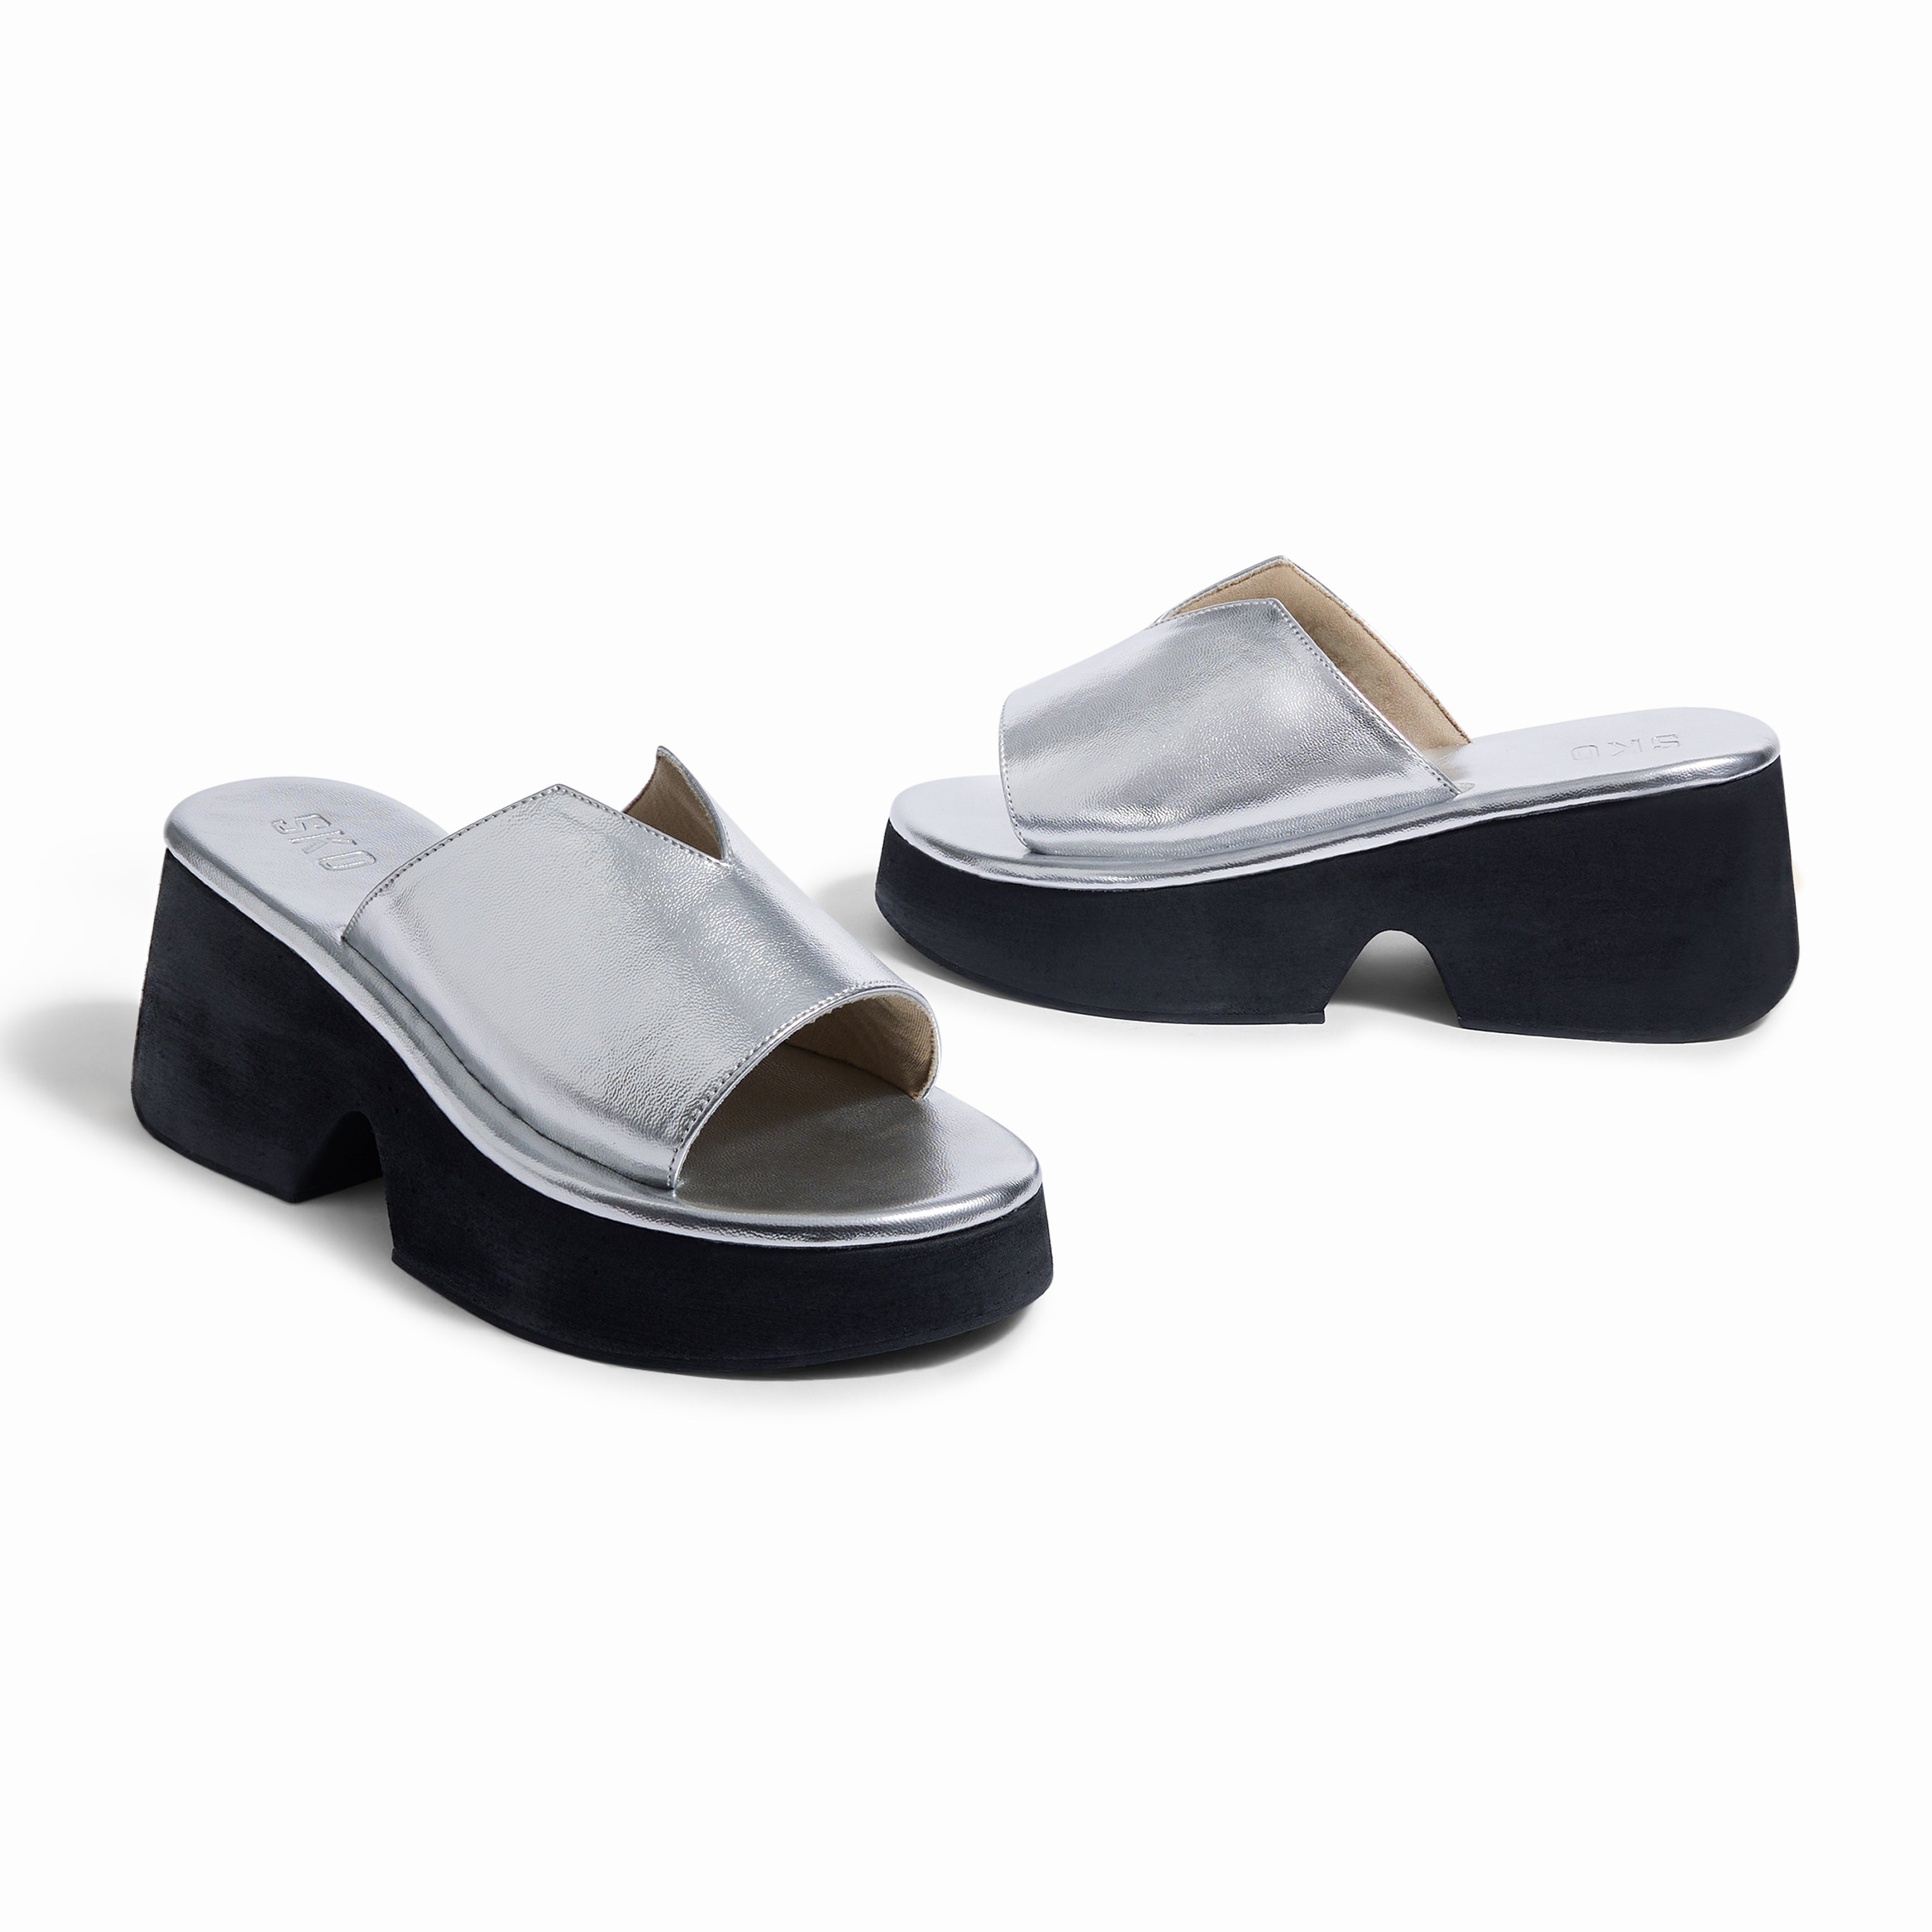 Modena Platforms in Silver For Women